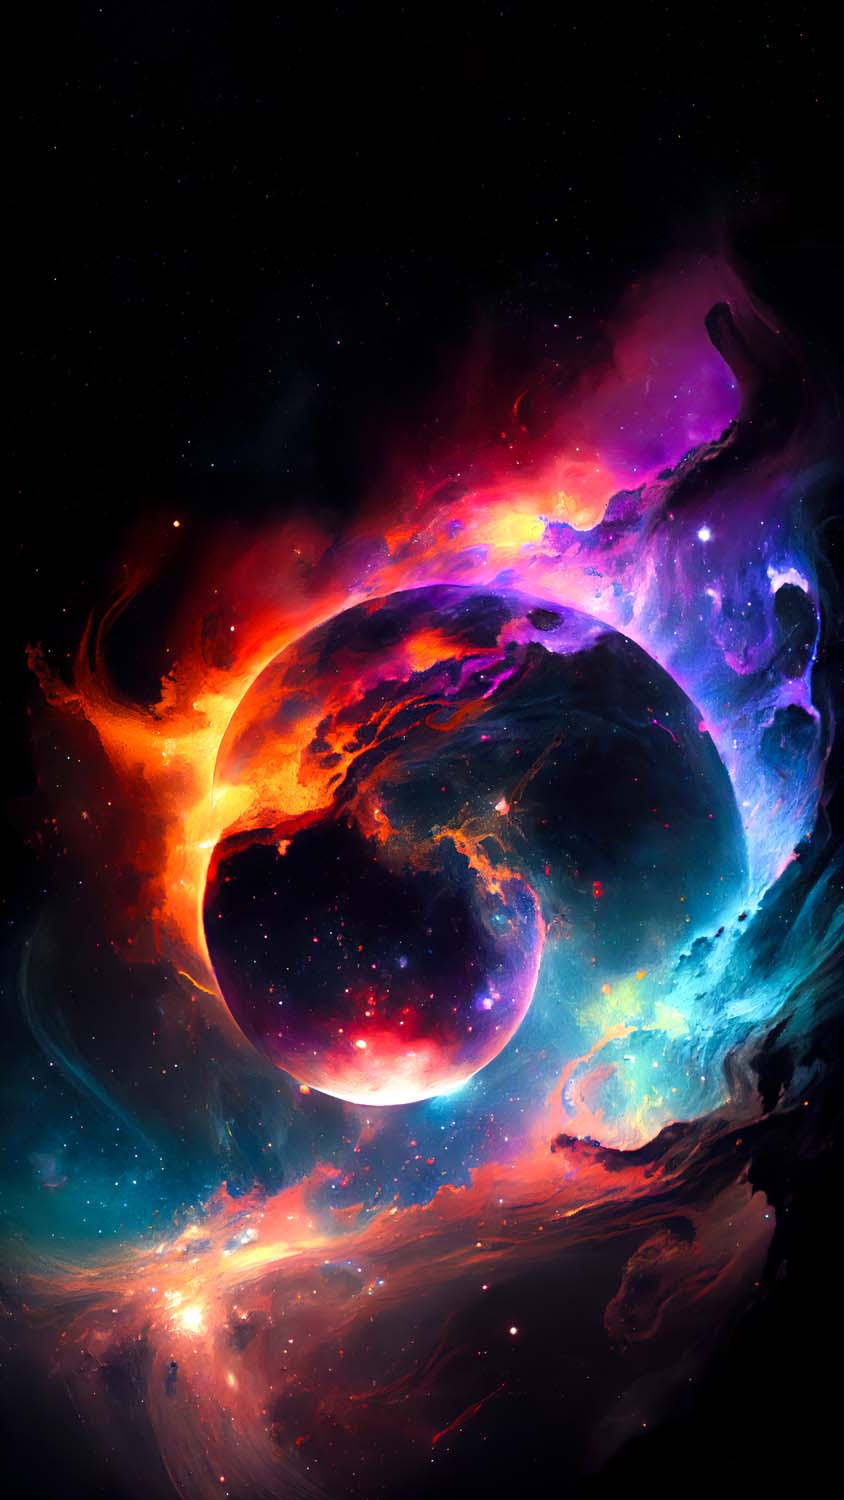 Axiolite  Digital Art Network on Twitter iPhone X 4K Wallpapers  Exploding Colorful Nebula Space 4K HD Android and iPhone Wallpaper  Background and Lockscreen httpstco6N1KylhHYS httpstcoLMrod34QWG   X